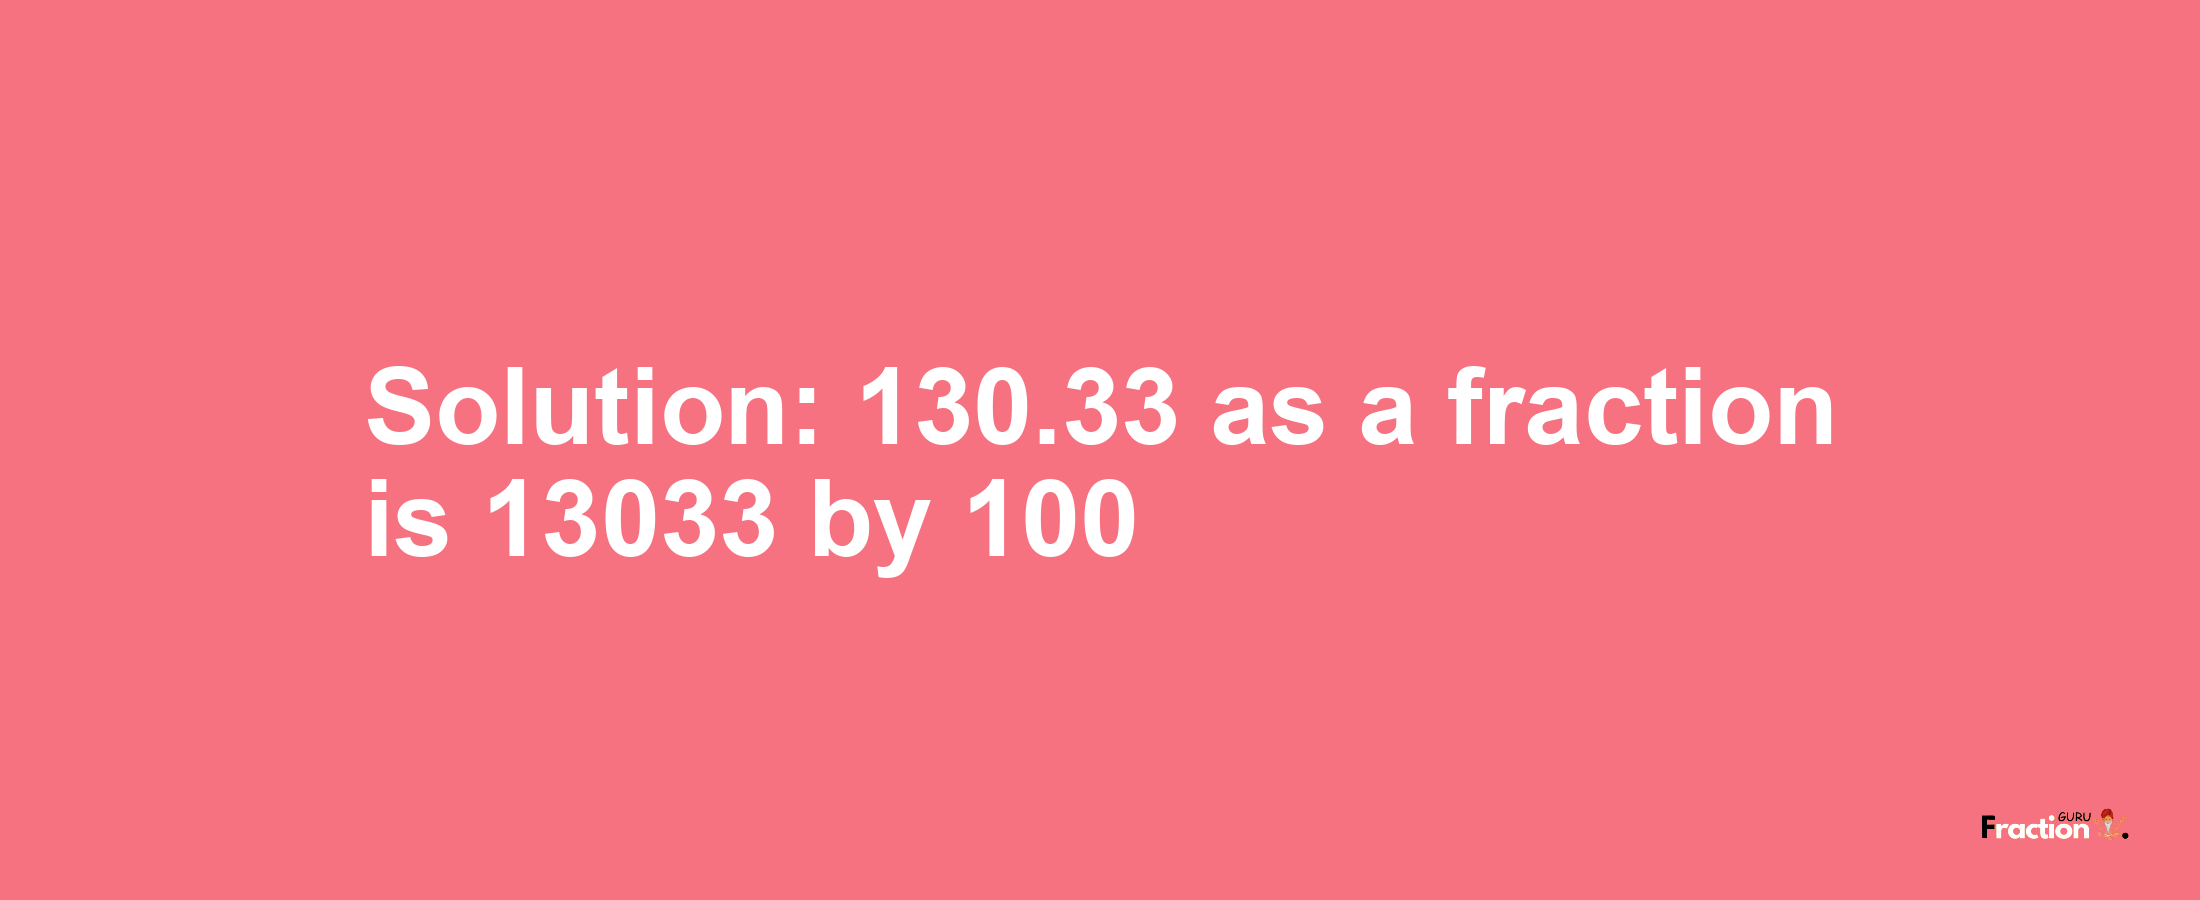 Solution:130.33 as a fraction is 13033/100